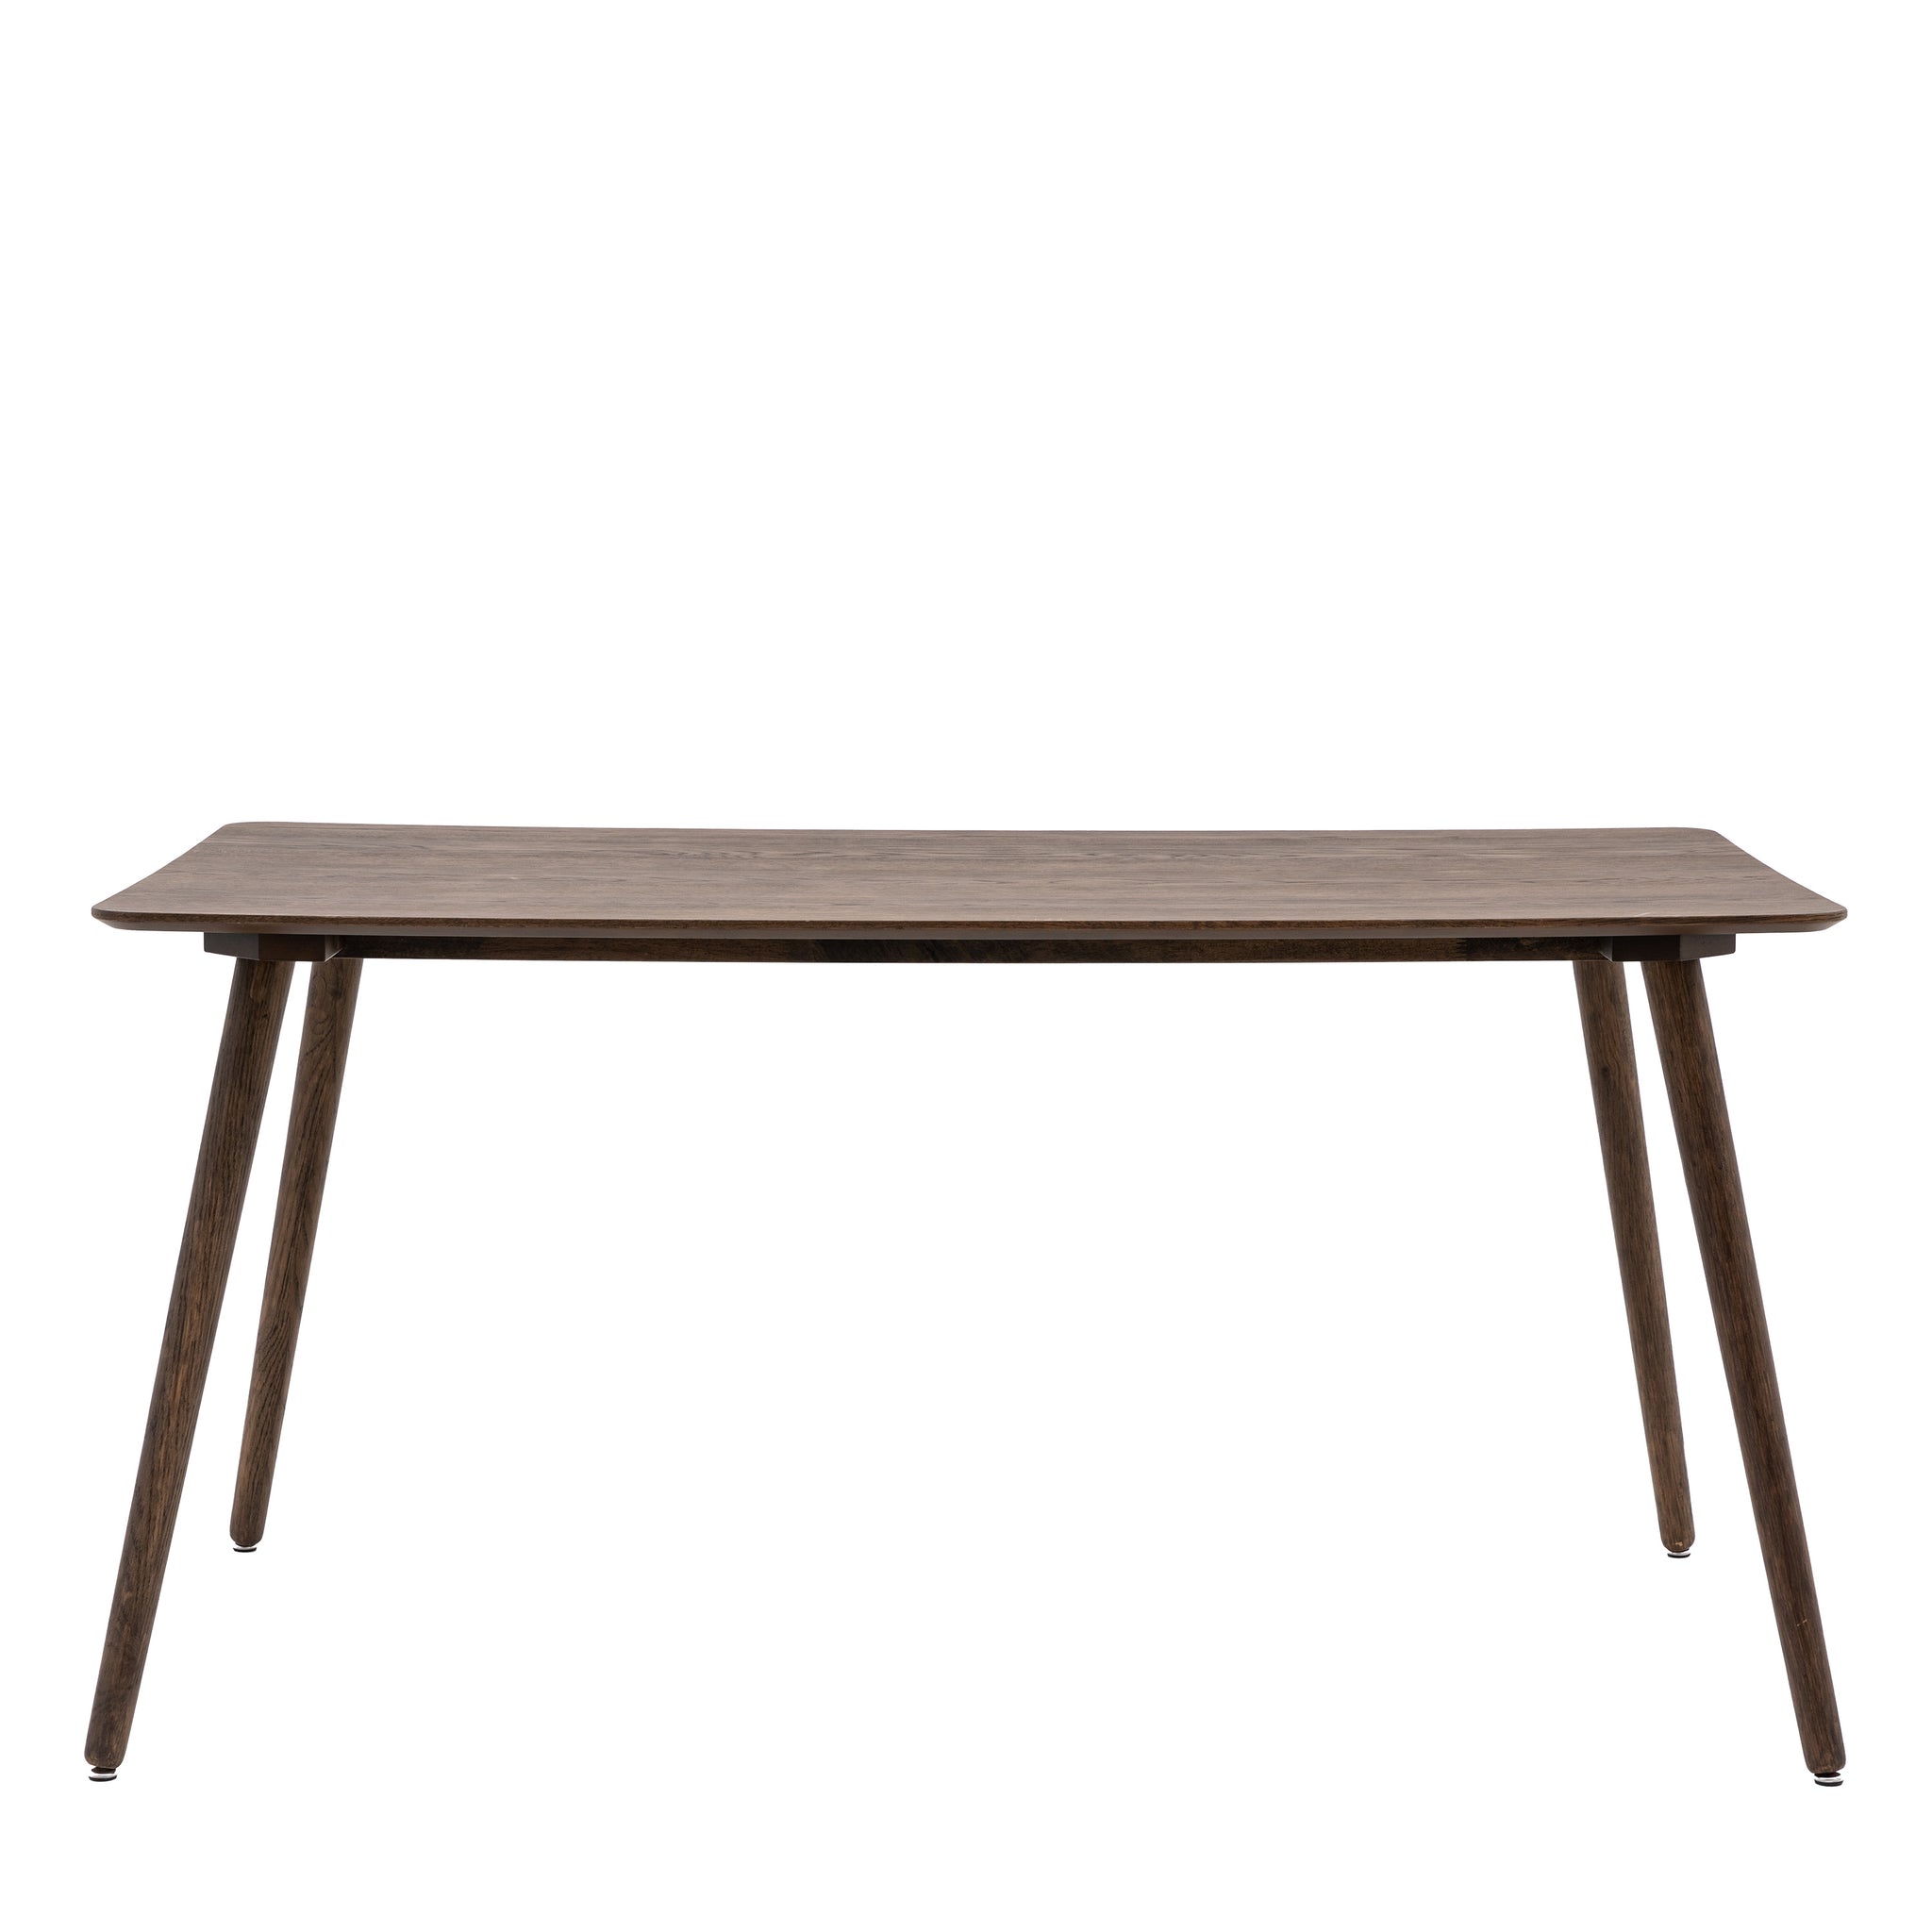 Harker Dining Table Smoked Large